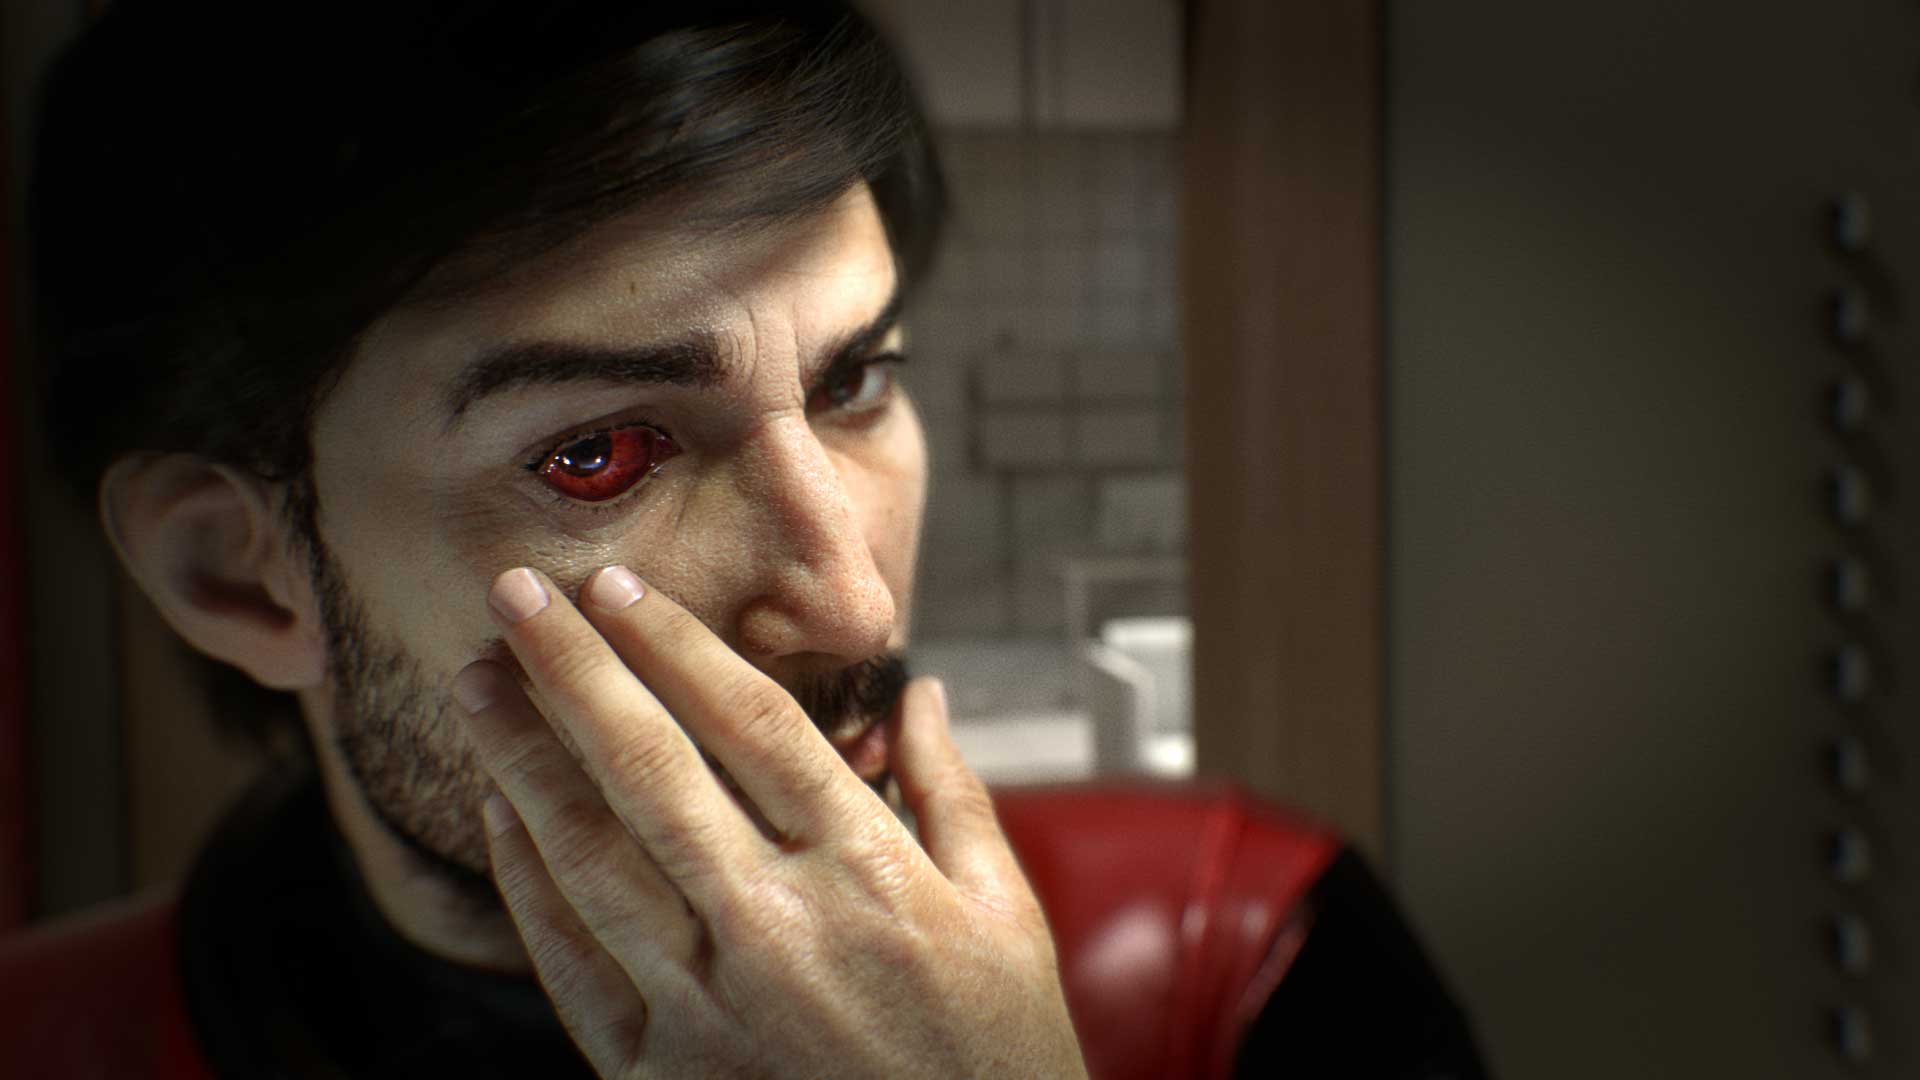 Image for "It's not like we're asking Arkane to make a racing game" - Bethesda VP on similarities between Dishonored and Prey